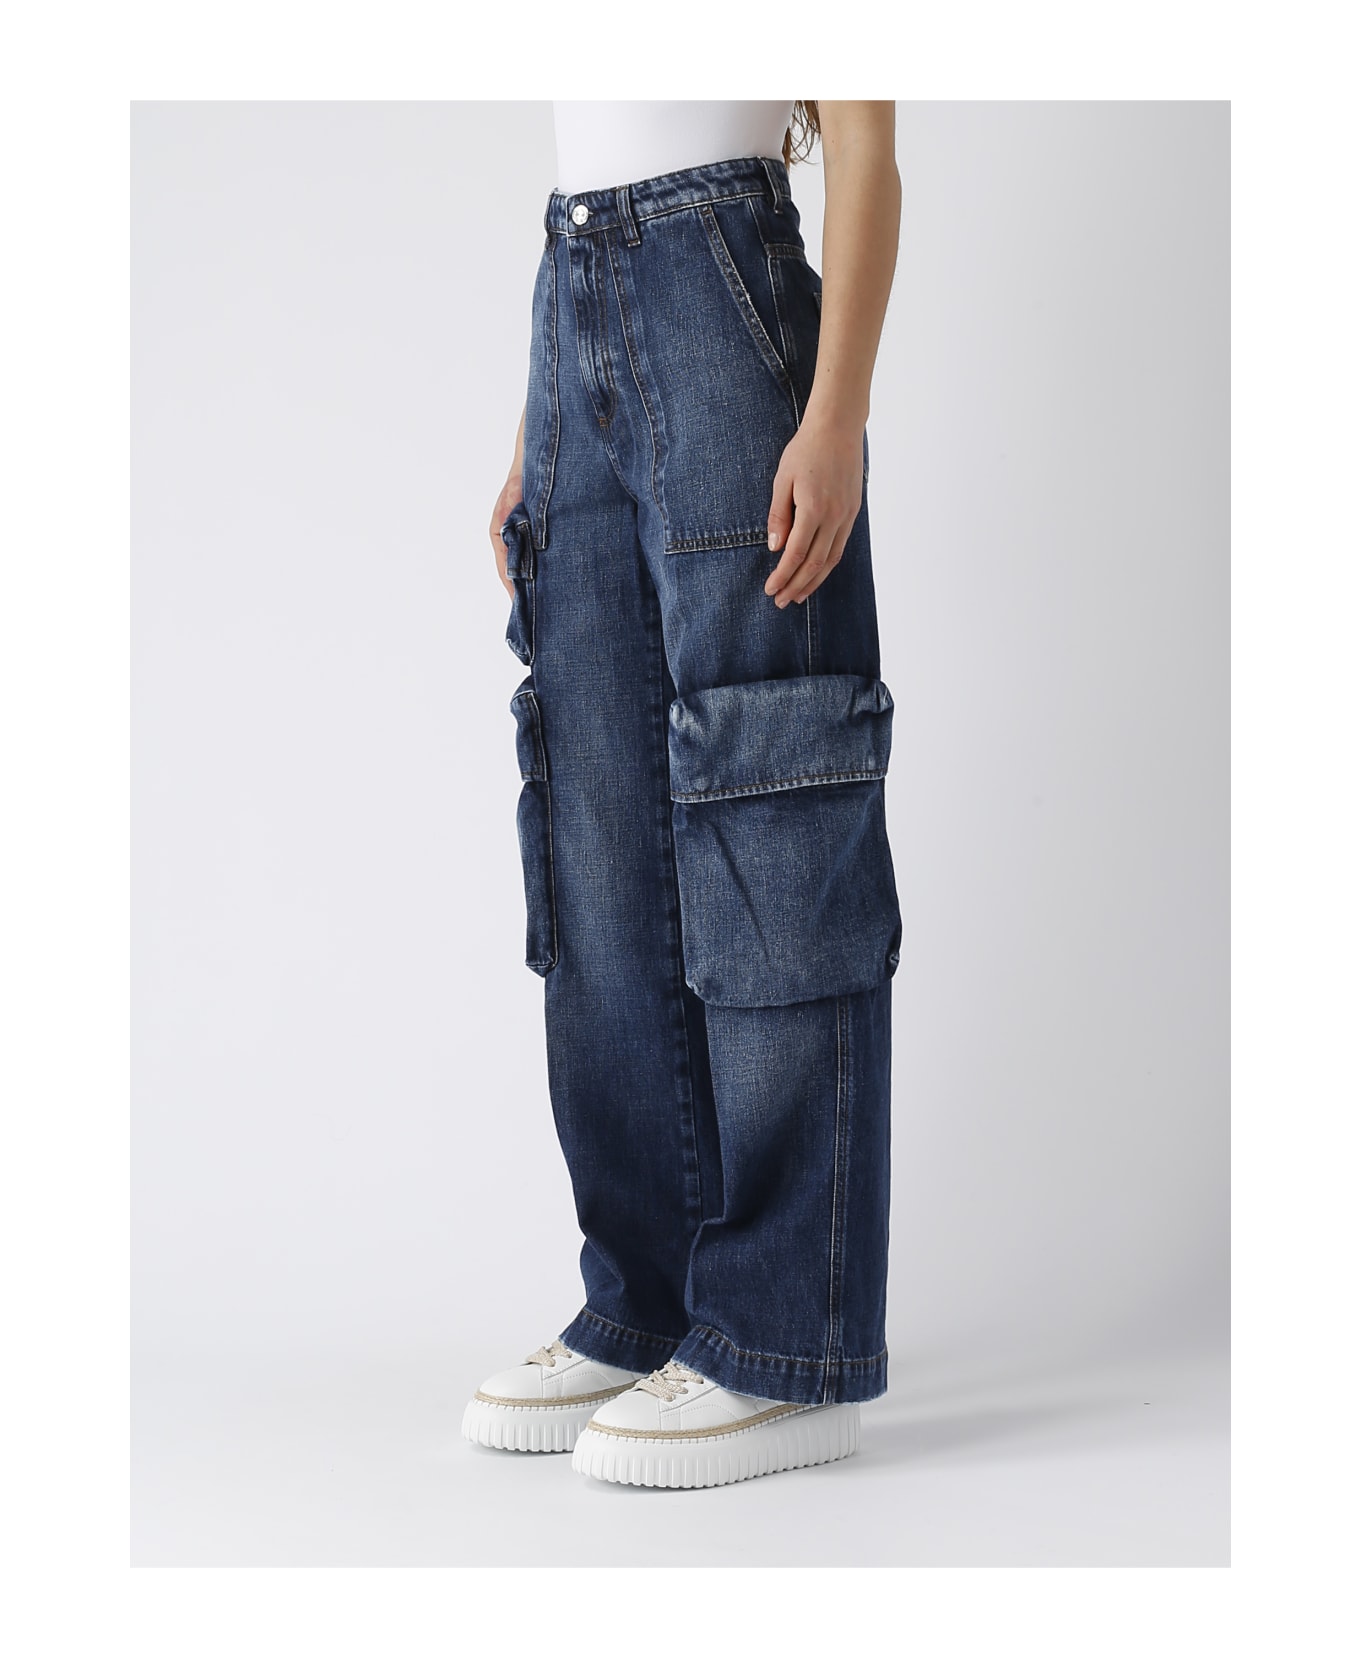 Nine in the Morning Madrid Jeans Jeans - DENIM SCURO